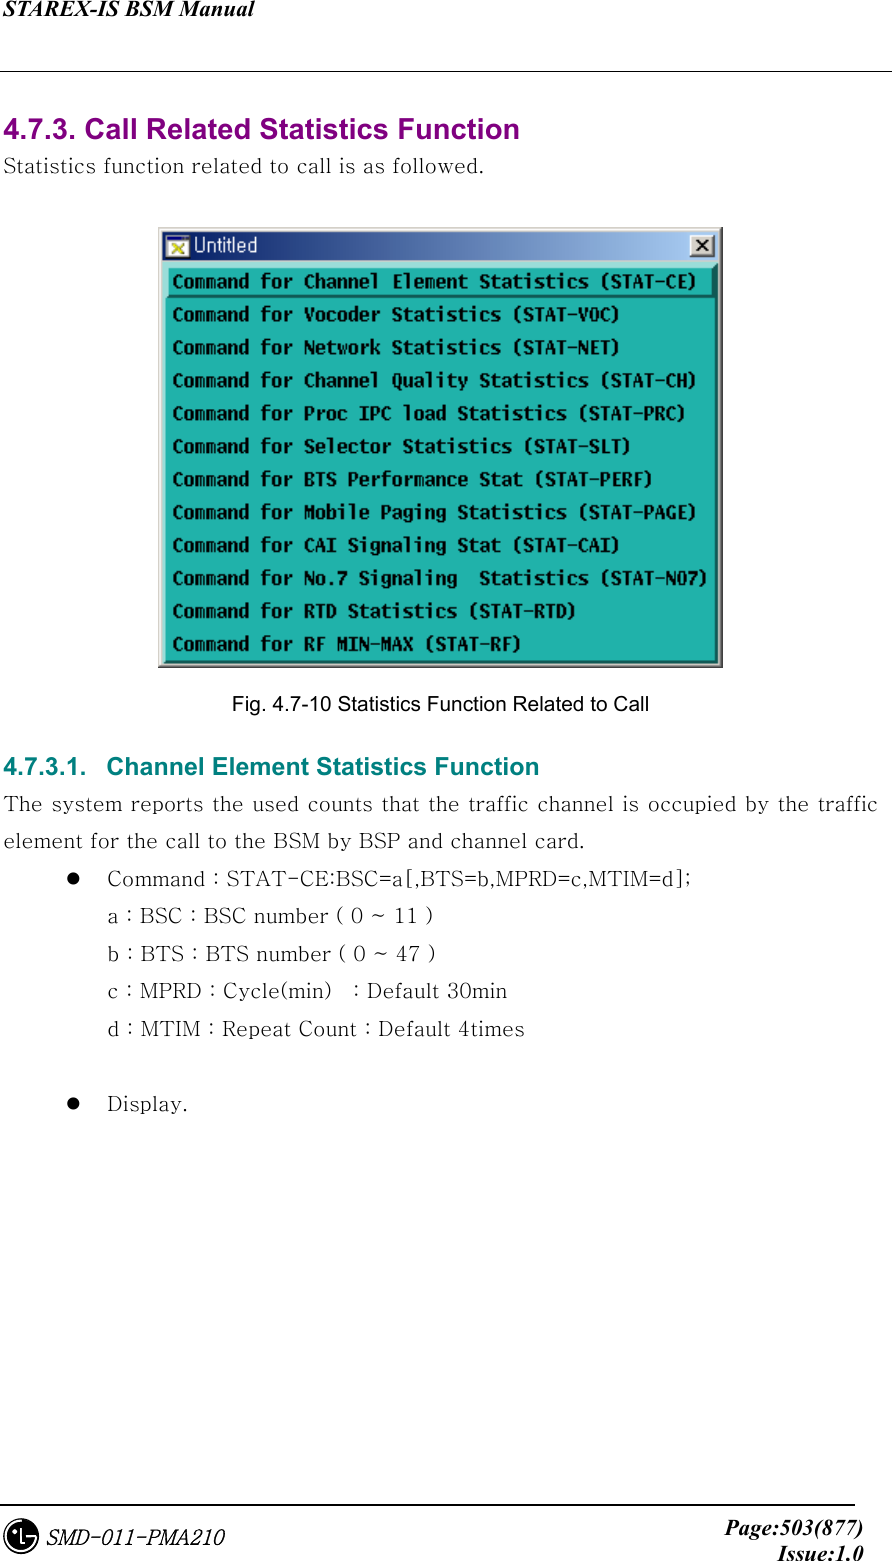 STAREX-IS BSM Manual     Page:503(877)Issue:1.0SMD-011-PMA210  4.7.3. Call Related Statistics Function     Statistics function related to call is as followed.   Fig. 4.7-10 Statistics Function Related to Call     4.7.3.1.   Channel Element Statistics Function The system reports the used counts that the traffic channel is occupied by the traffic element for the call to the BSM by BSP and channel card.   Command : STAT-CE:BSC=a[,BTS=b,MPRD=c,MTIM=d]; a : BSC : BSC number ( 0 ~ 11 ) b : BTS : BTS number ( 0 ~ 47 ) c : MPRD : Cycle(min)    : Default 30min d : MTIM : Repeat Count : Default 4times    Display.  